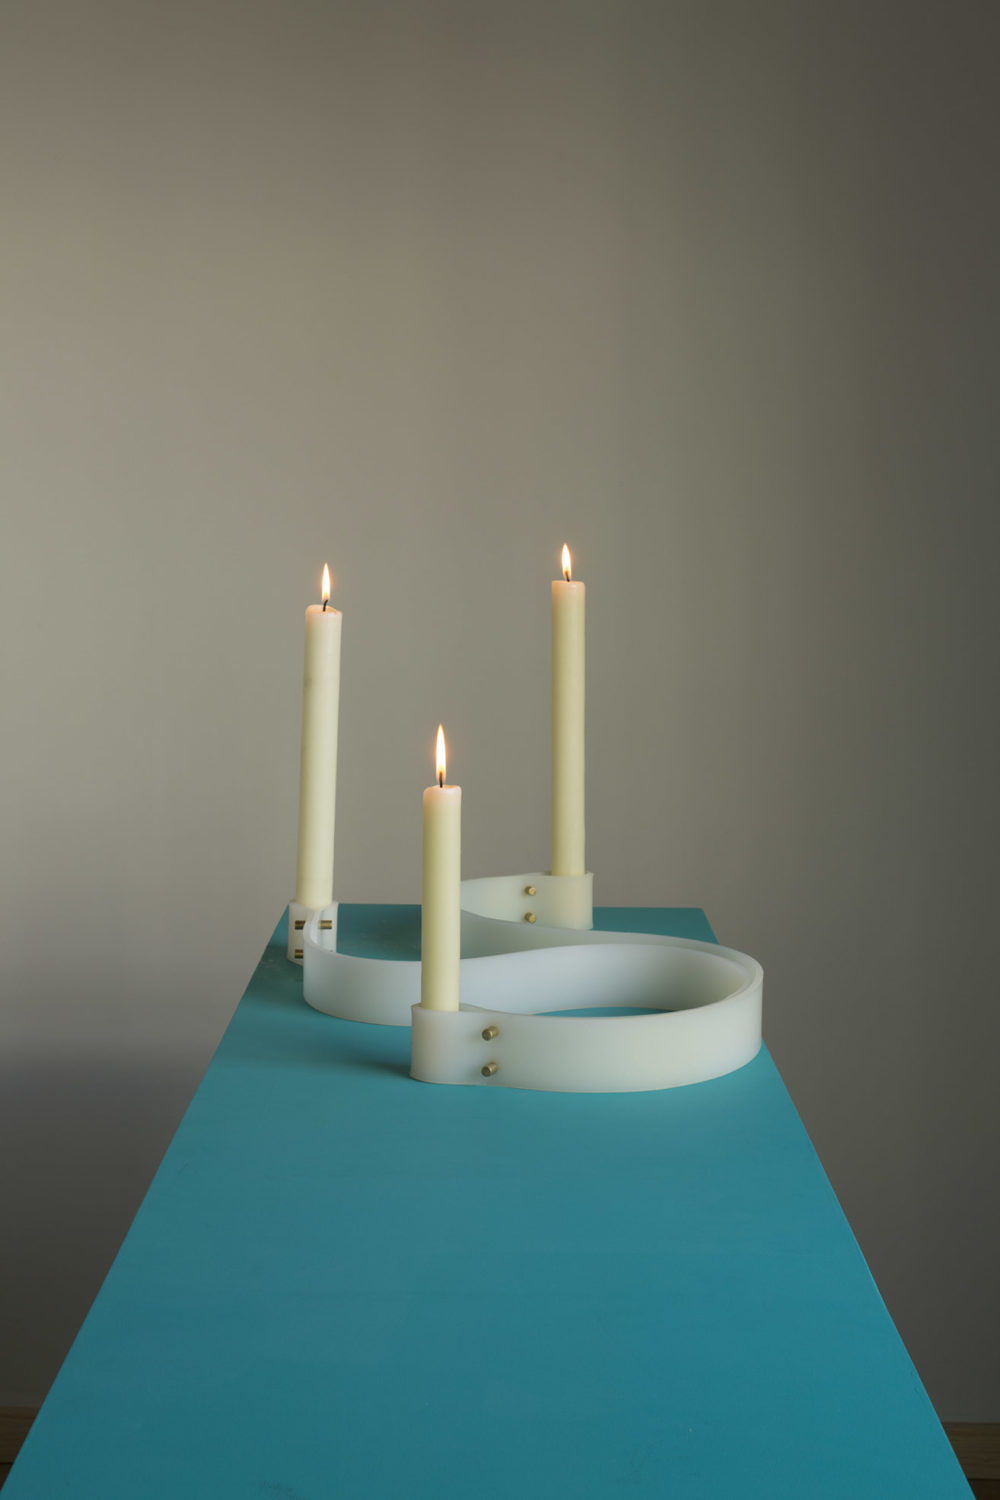 White Rubber Candle Holder Collection, 2019